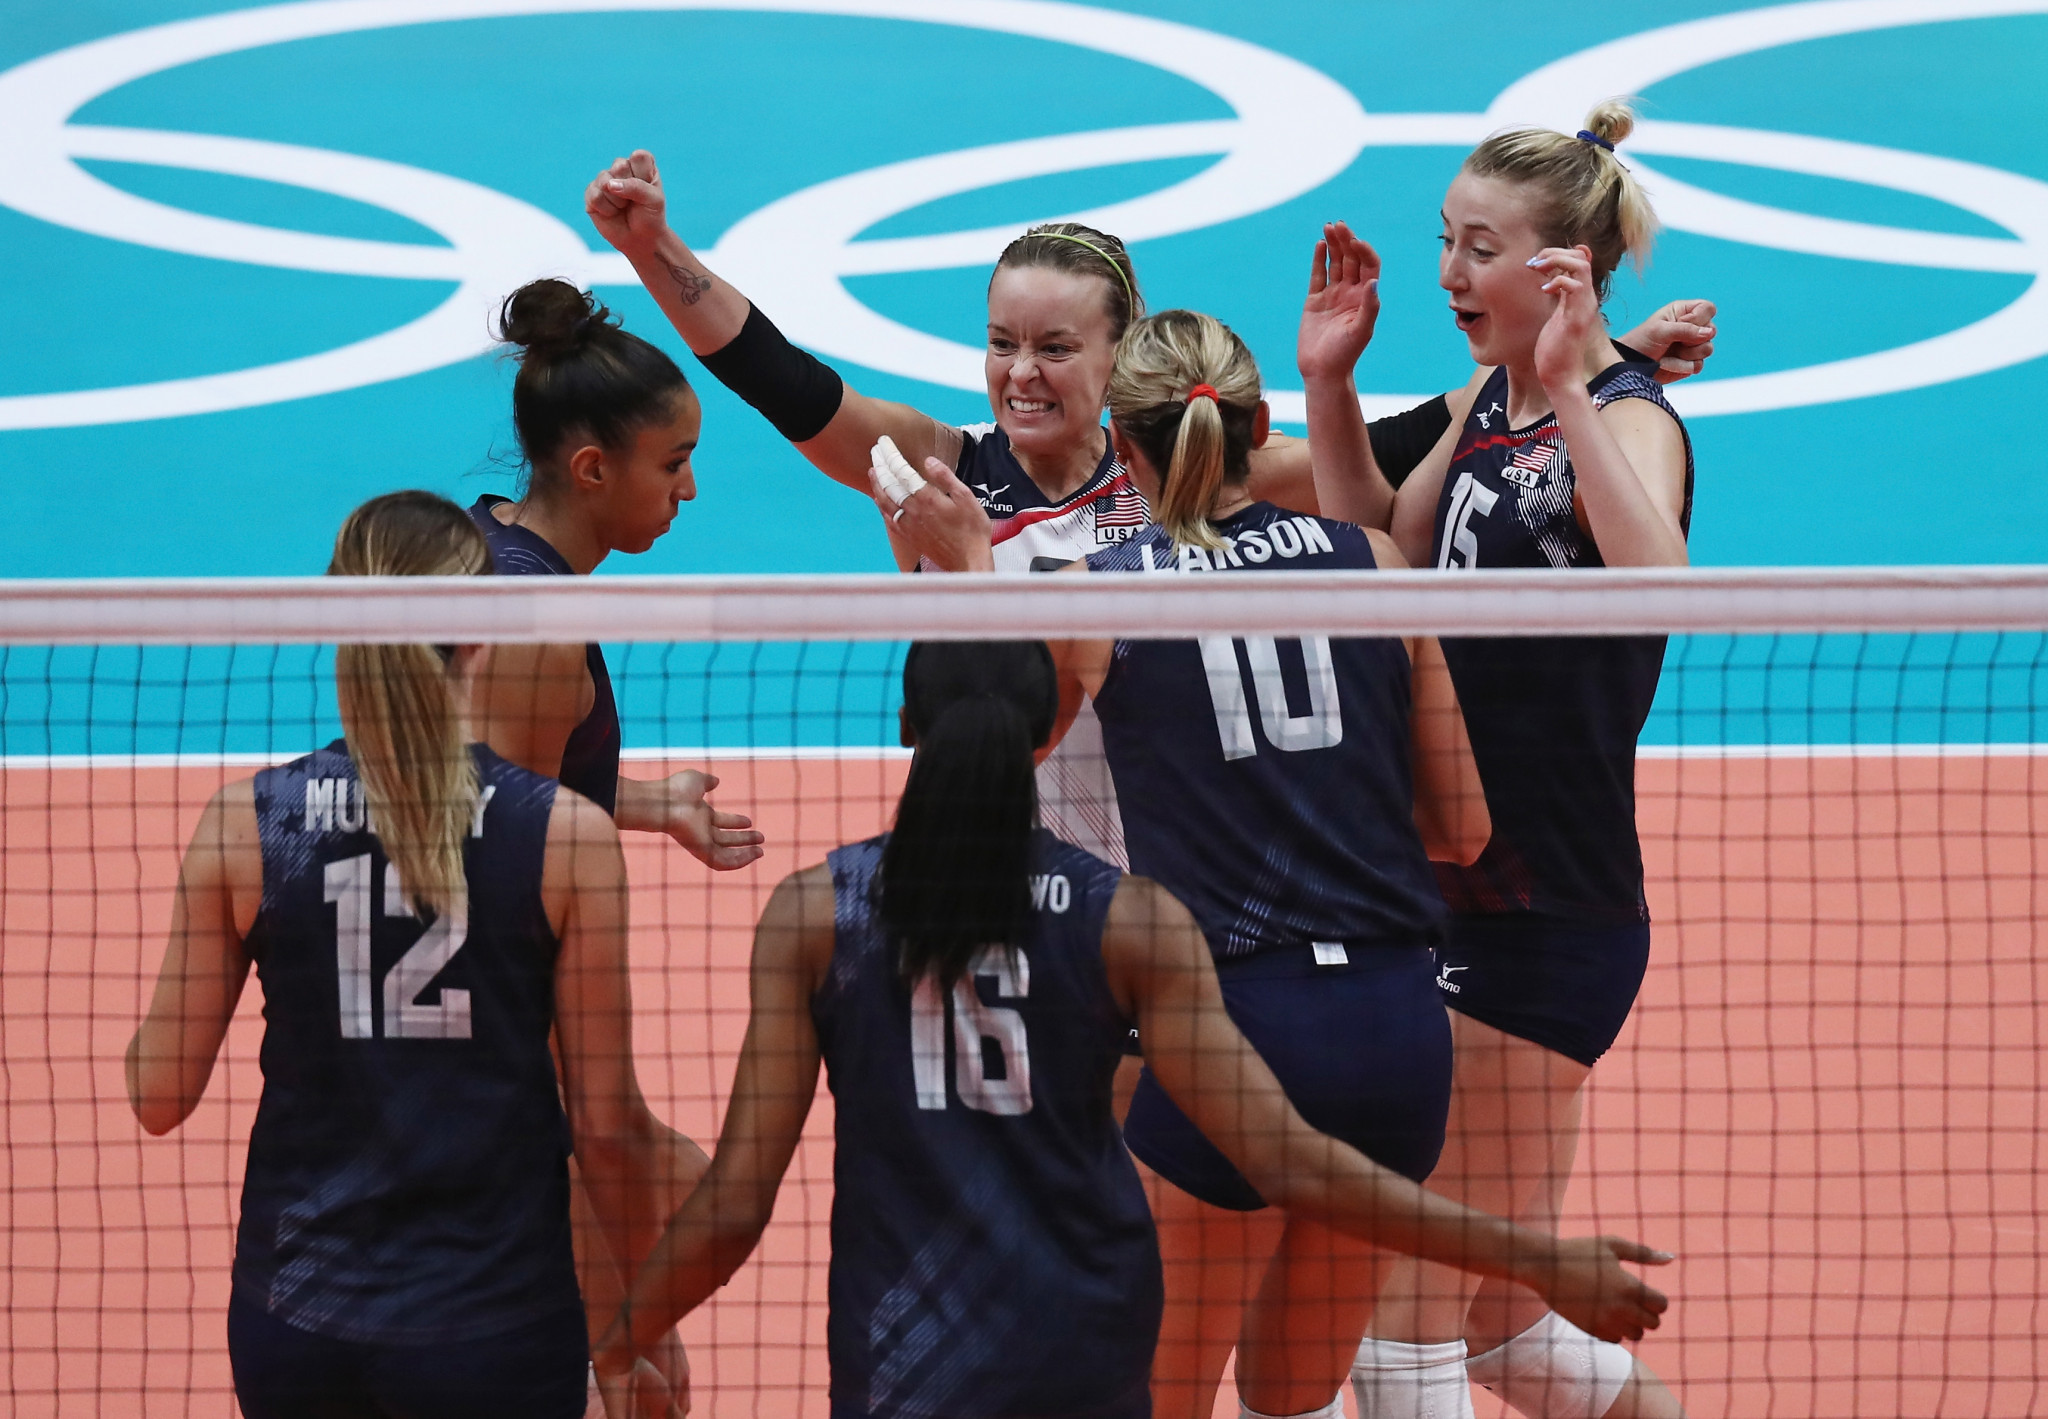 China seeking record-breaking fifth FIVB Women's World Cup title